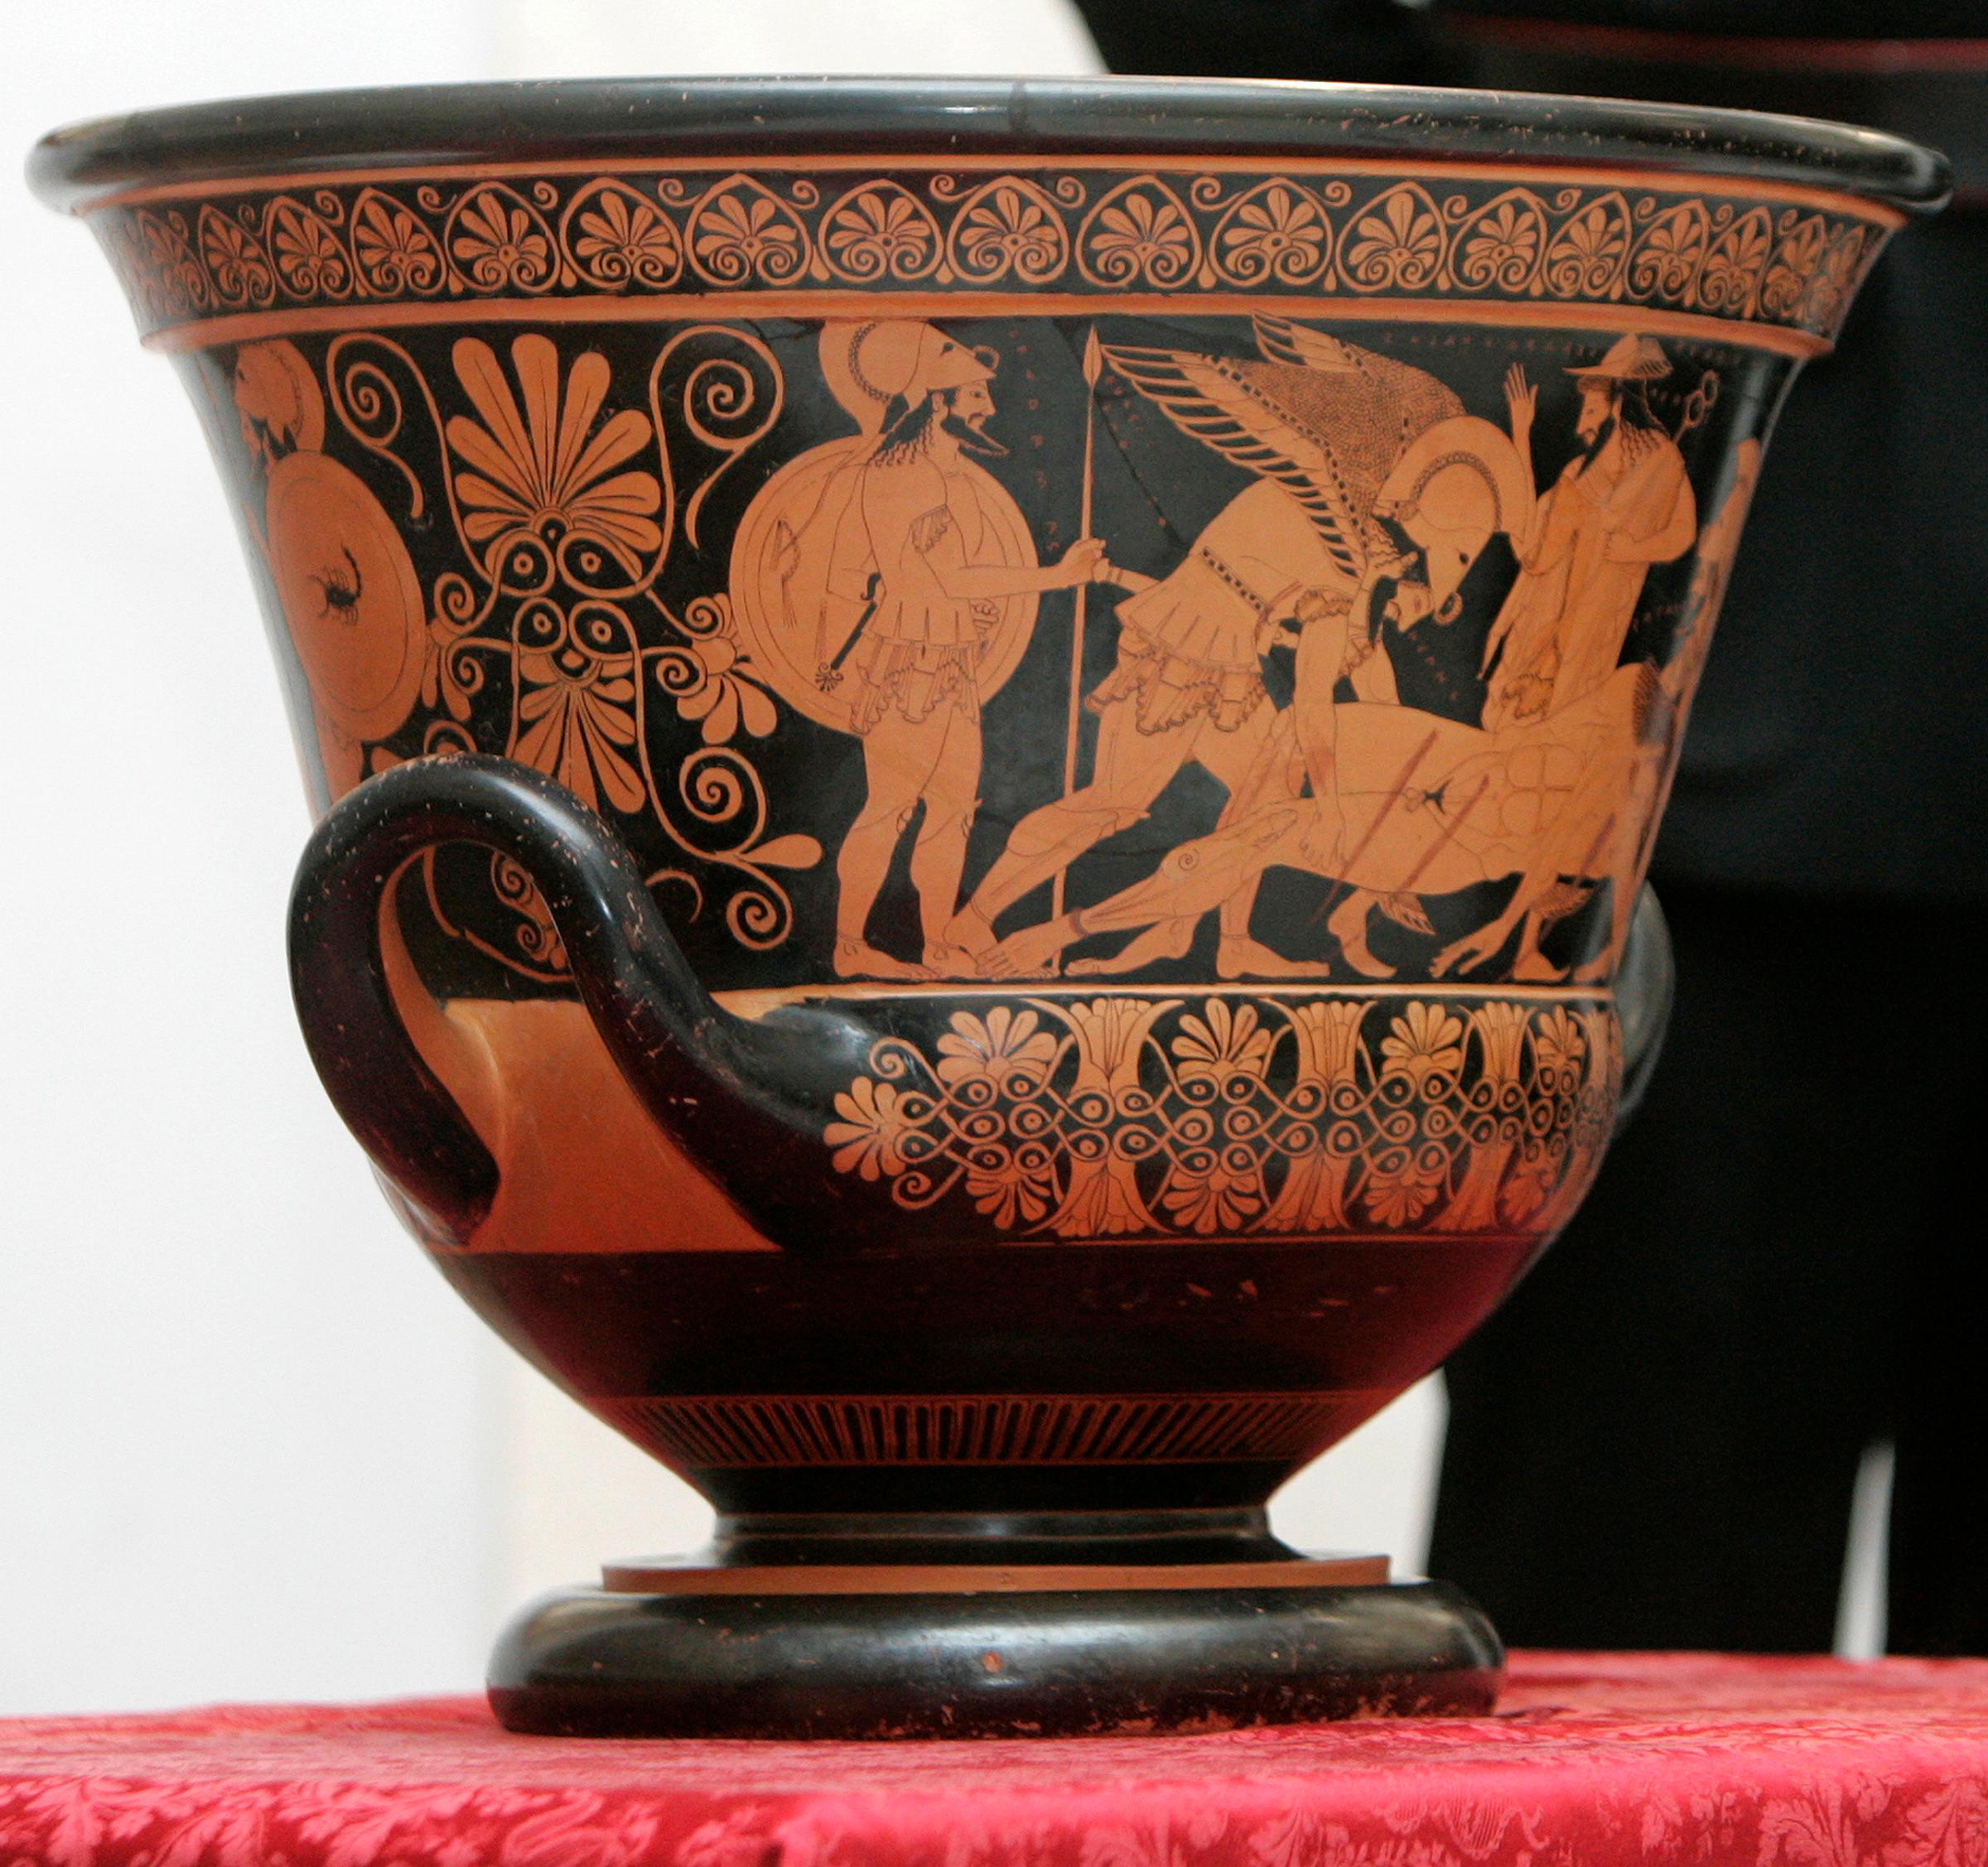 The Euphronios krater vase is presented during a news conference in Rome